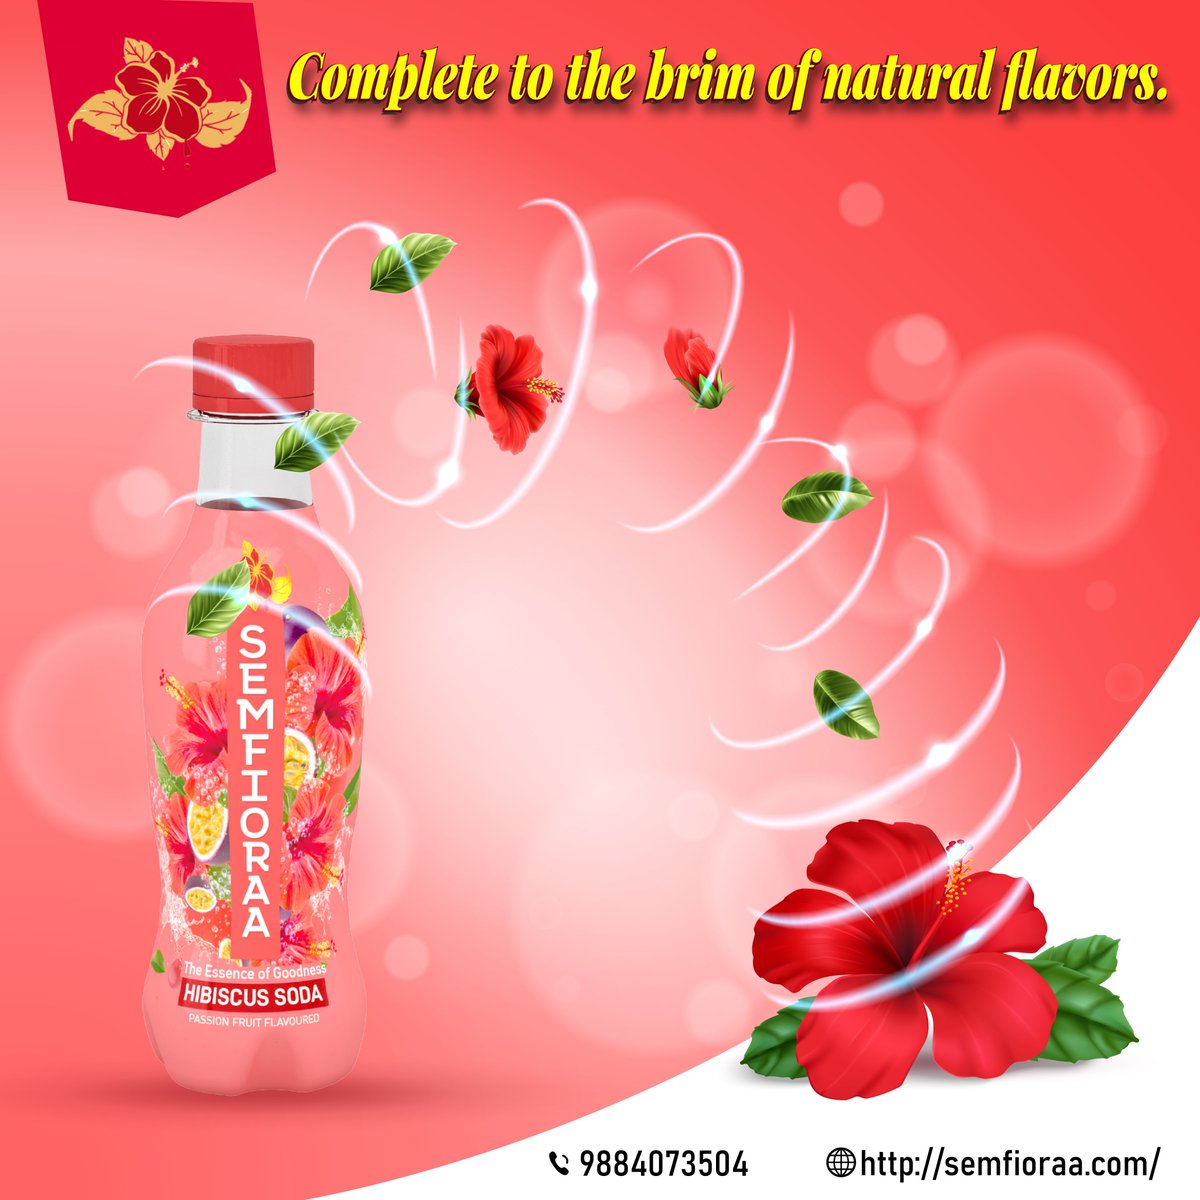 Semfioraa - Complete to the brim of natural flavors.🌺🌺🌺
9884073504 | semfioraa.com
#puducherry #cooldrinks #drinks #HealthyLiving #healthy #healthylifestyle #healthydrink
#floralcooldrink #hibiscusdrink #floraldrinks #juicecleanse #drinkspecials #drinklocally